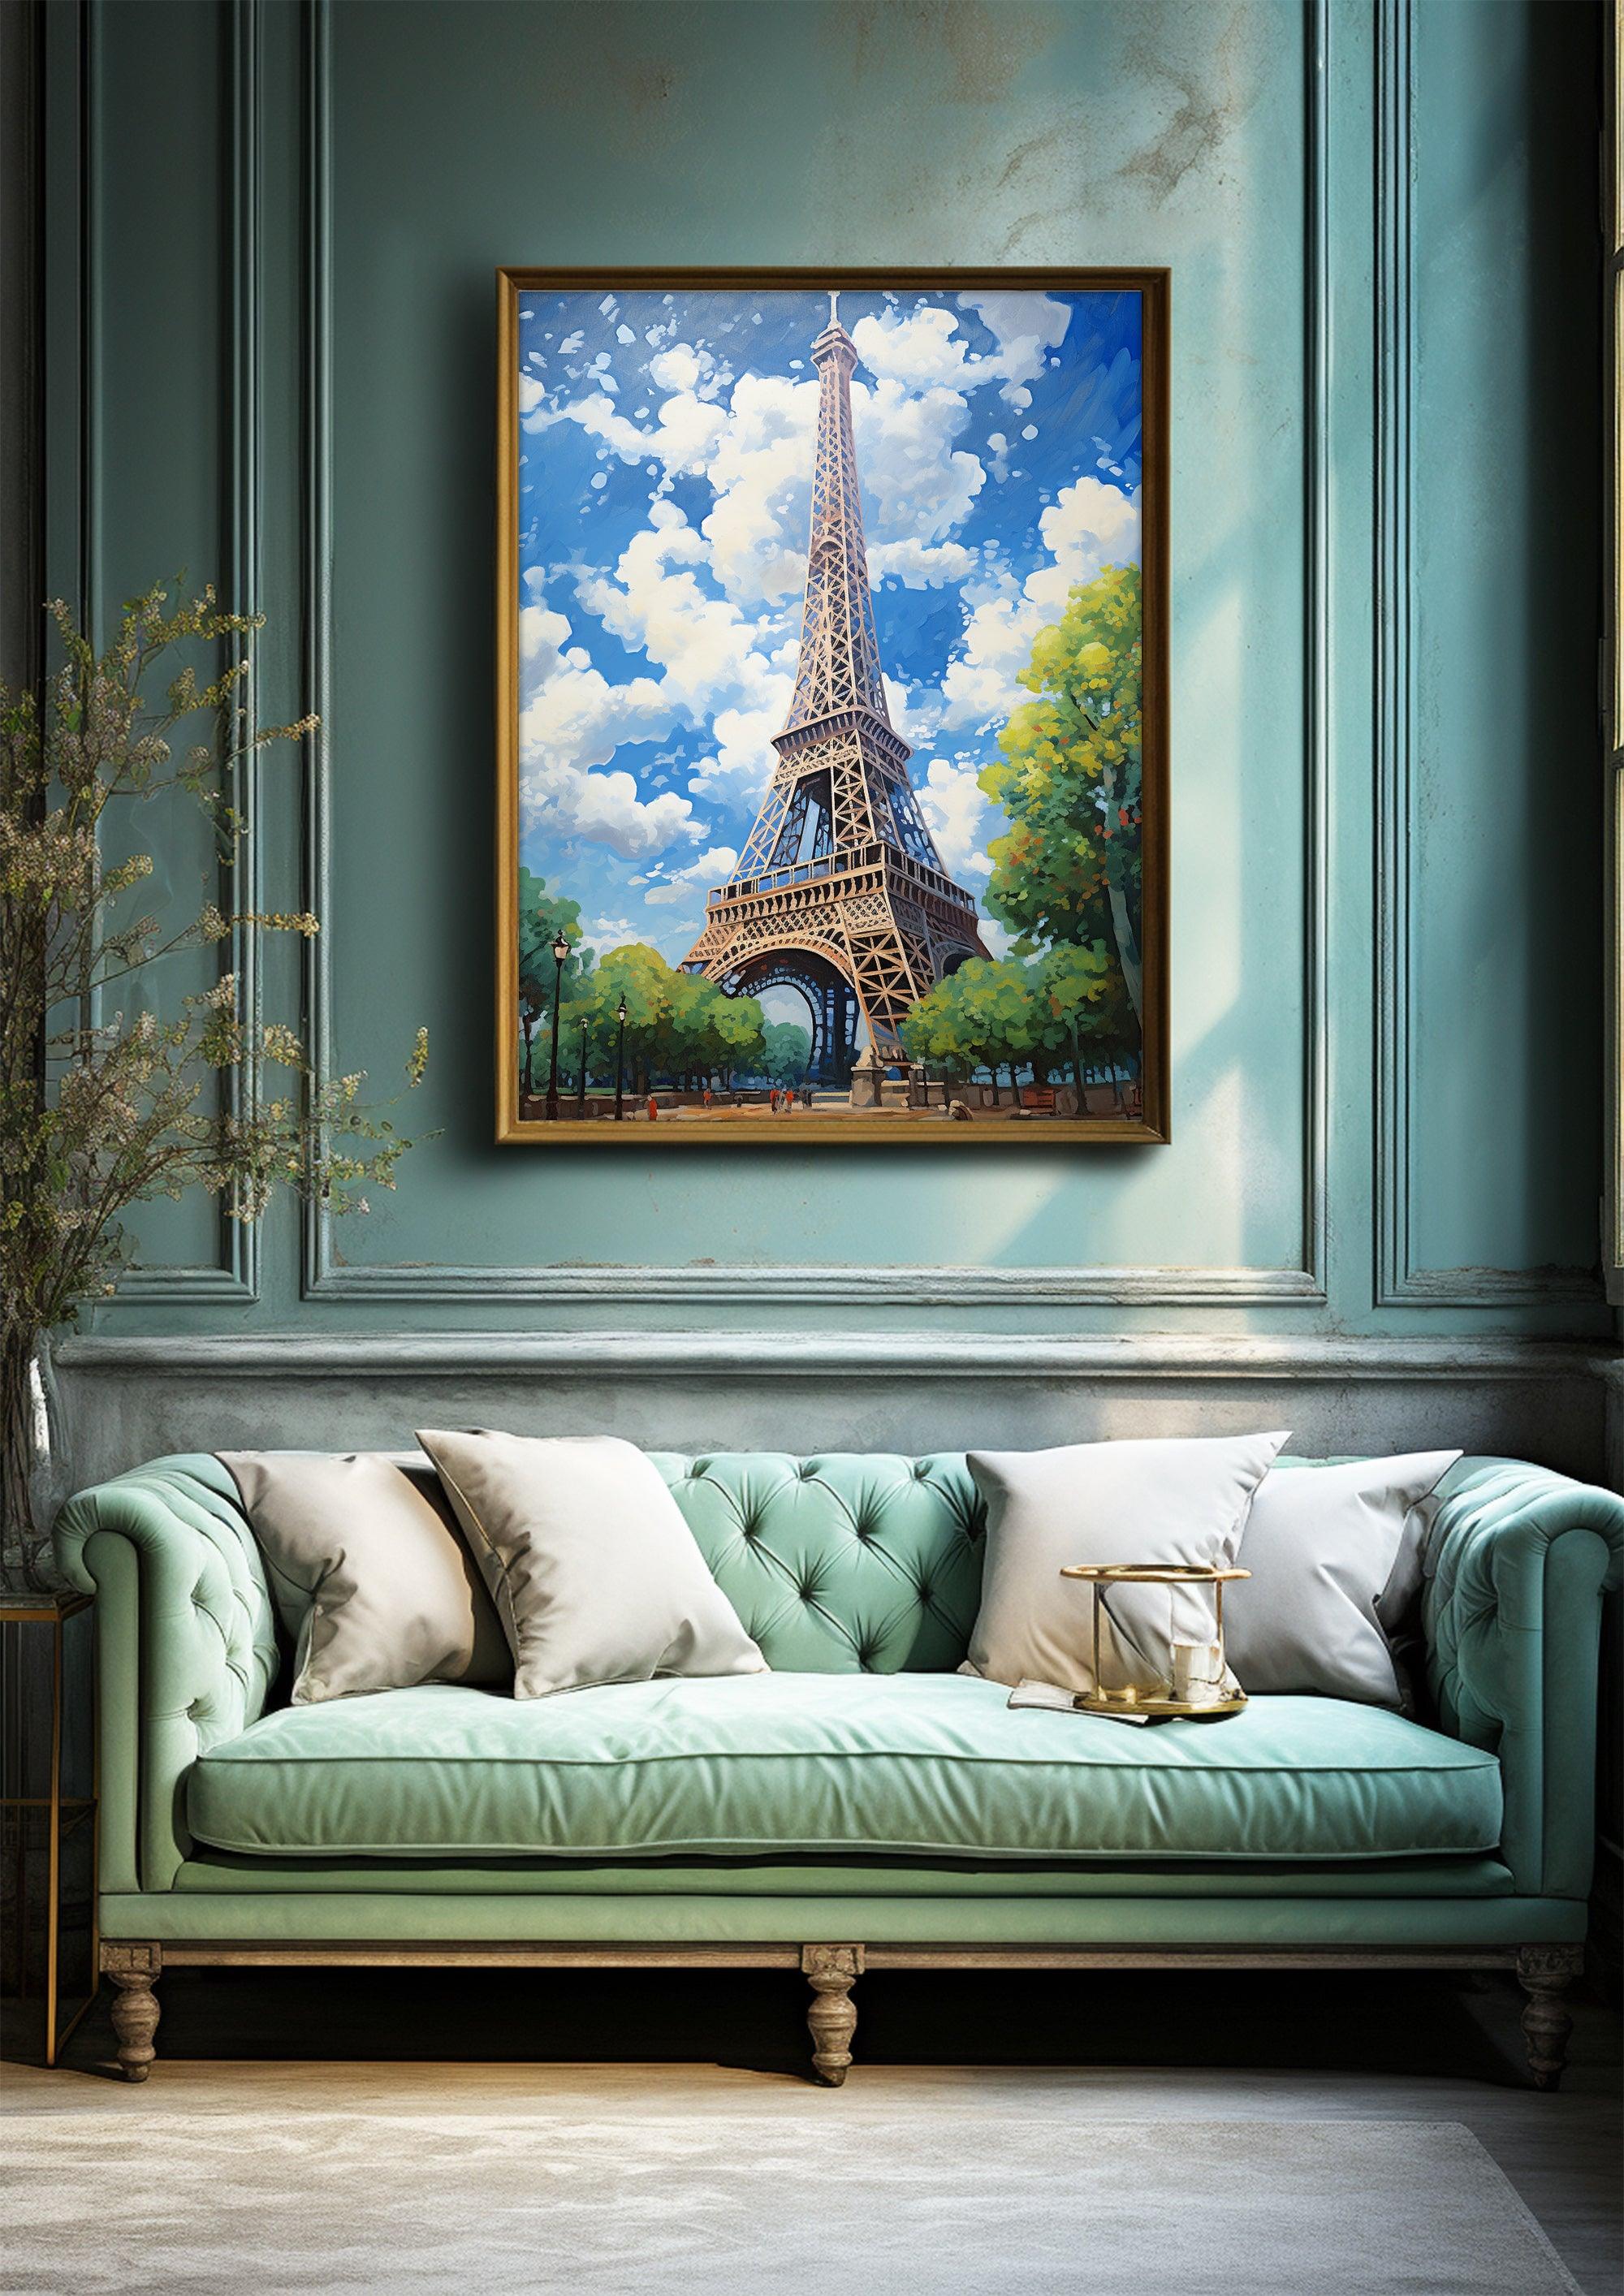 Eiffel Tower,Framed Fine Art Paper Prints，Wall art Prints for Your Home and Office Décor Needs，Vintage Wall Art Print ，Moody Wall Decor，Nature Prints Wall Art， Home Art Decor，High-Quality professional Giclee technique #13